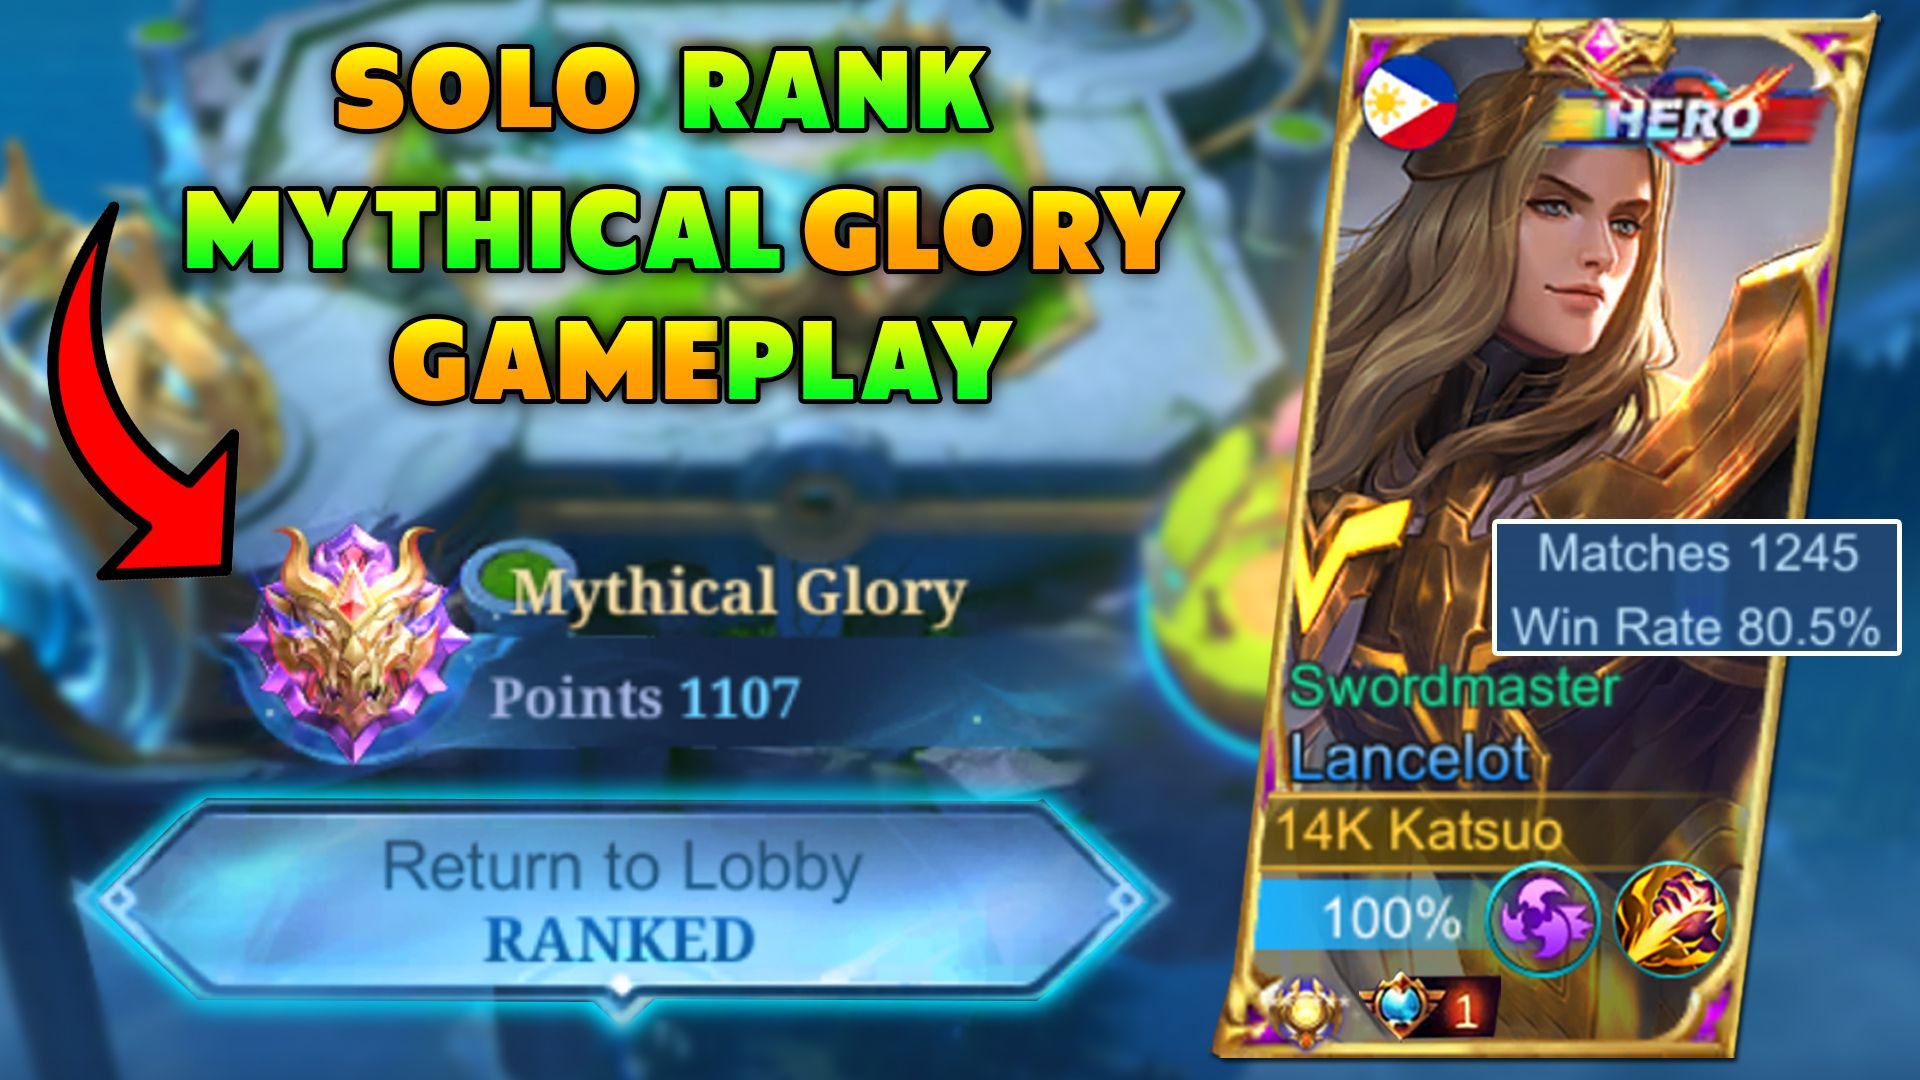 How To Play Lancelot On Mythical Glory 1000 Plus Points Solo High Rank Gameplay Intense Game Bilibili